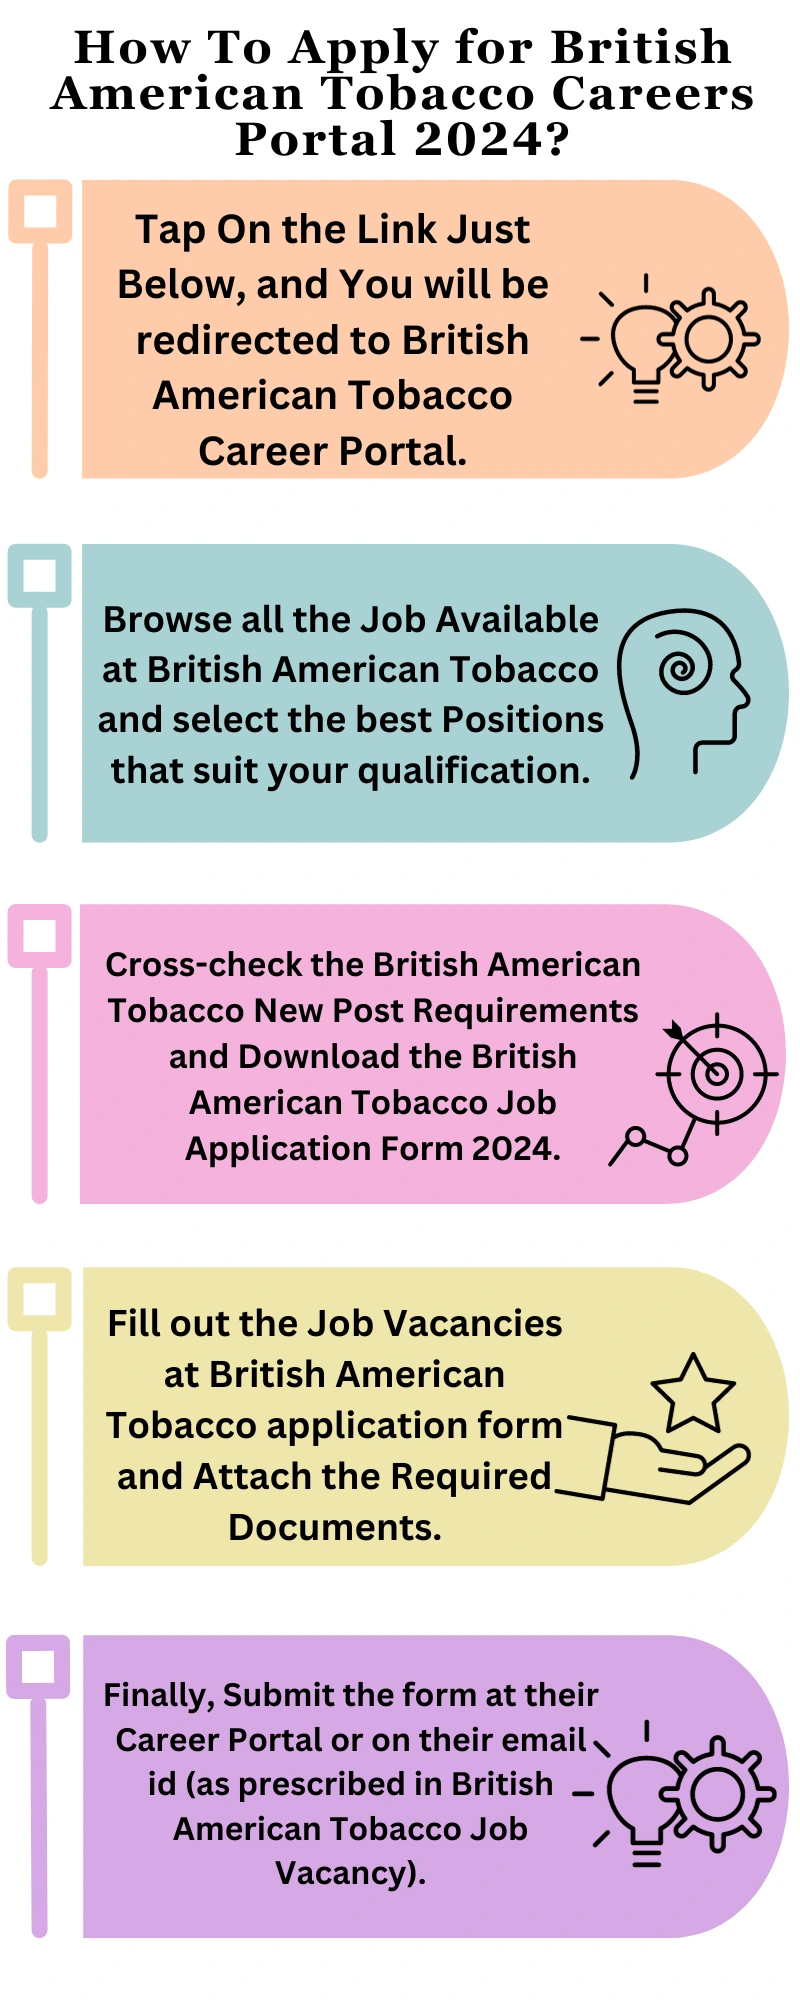 How To Apply for British American Tobacco Careers Portal 2024 (1)